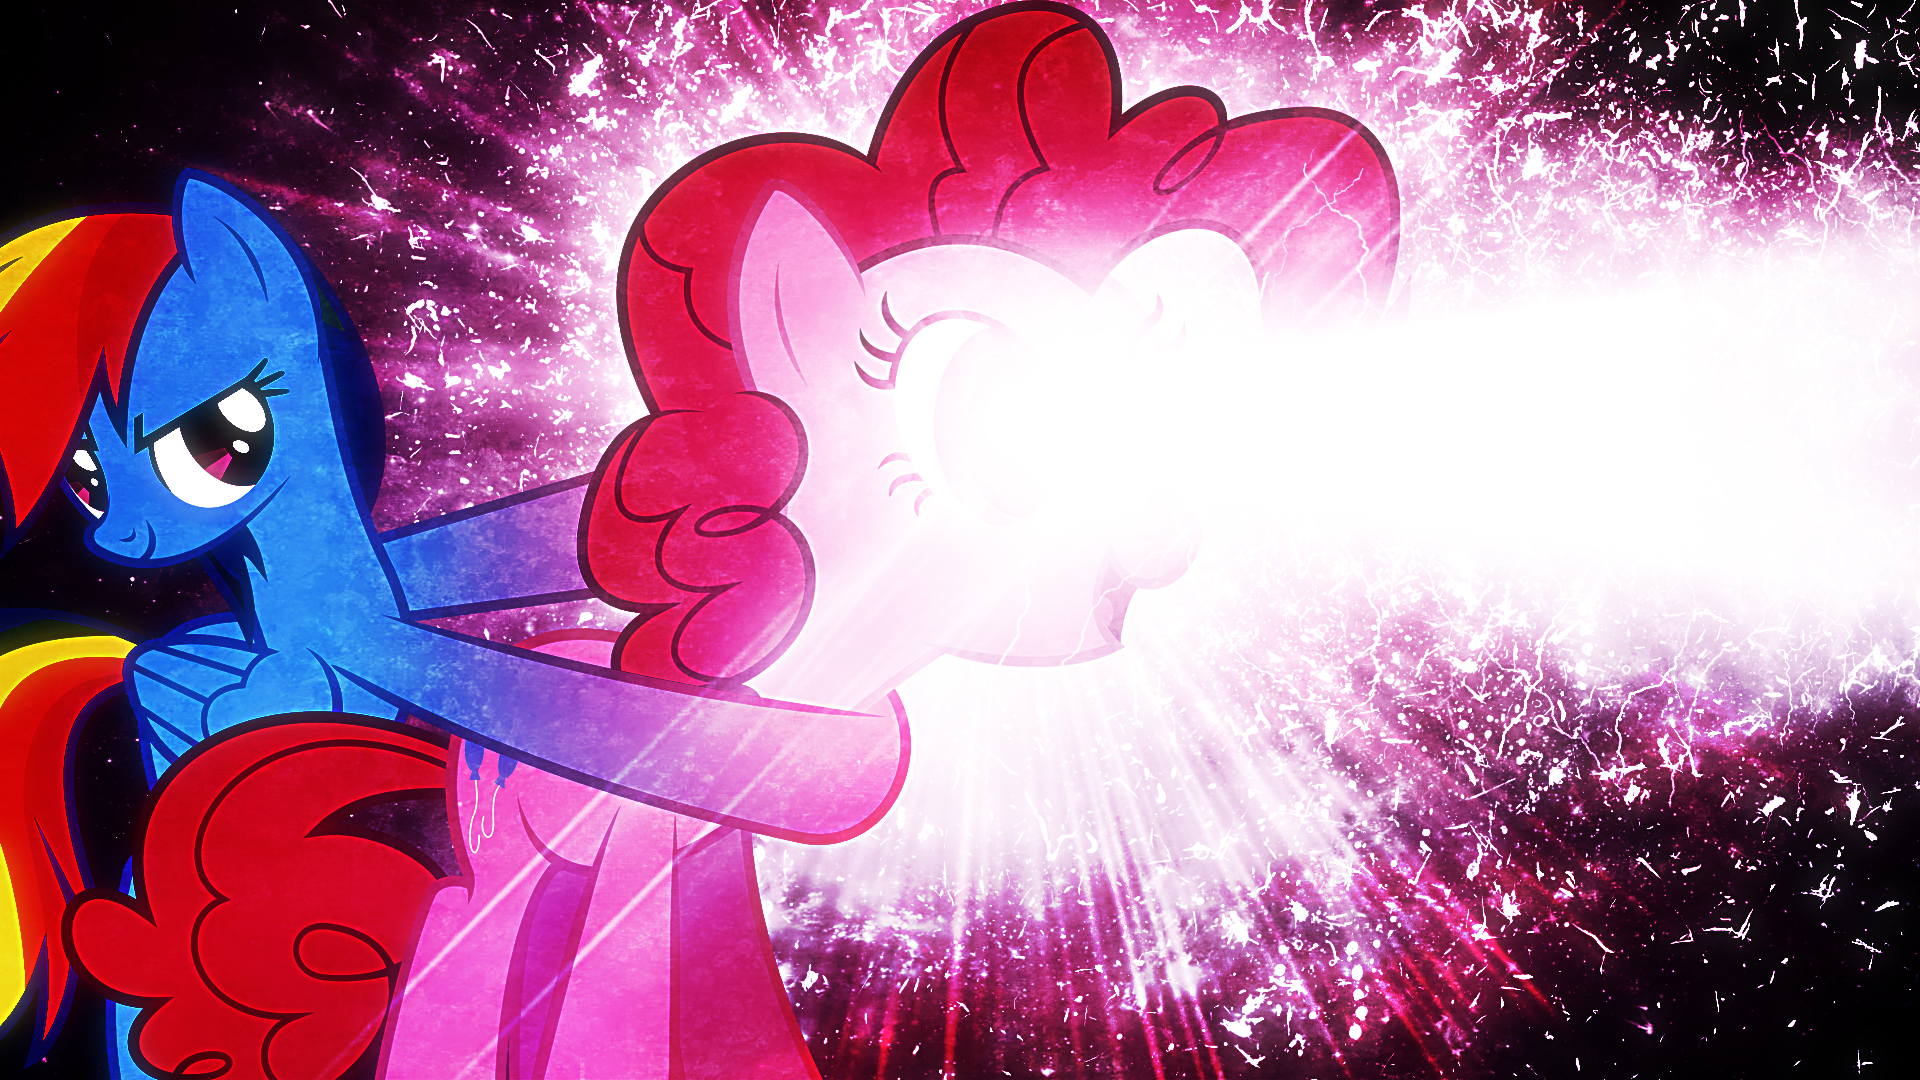 PINKIE CANNON FIRING - Wallpaper by flutterguy317 and Tzolkine